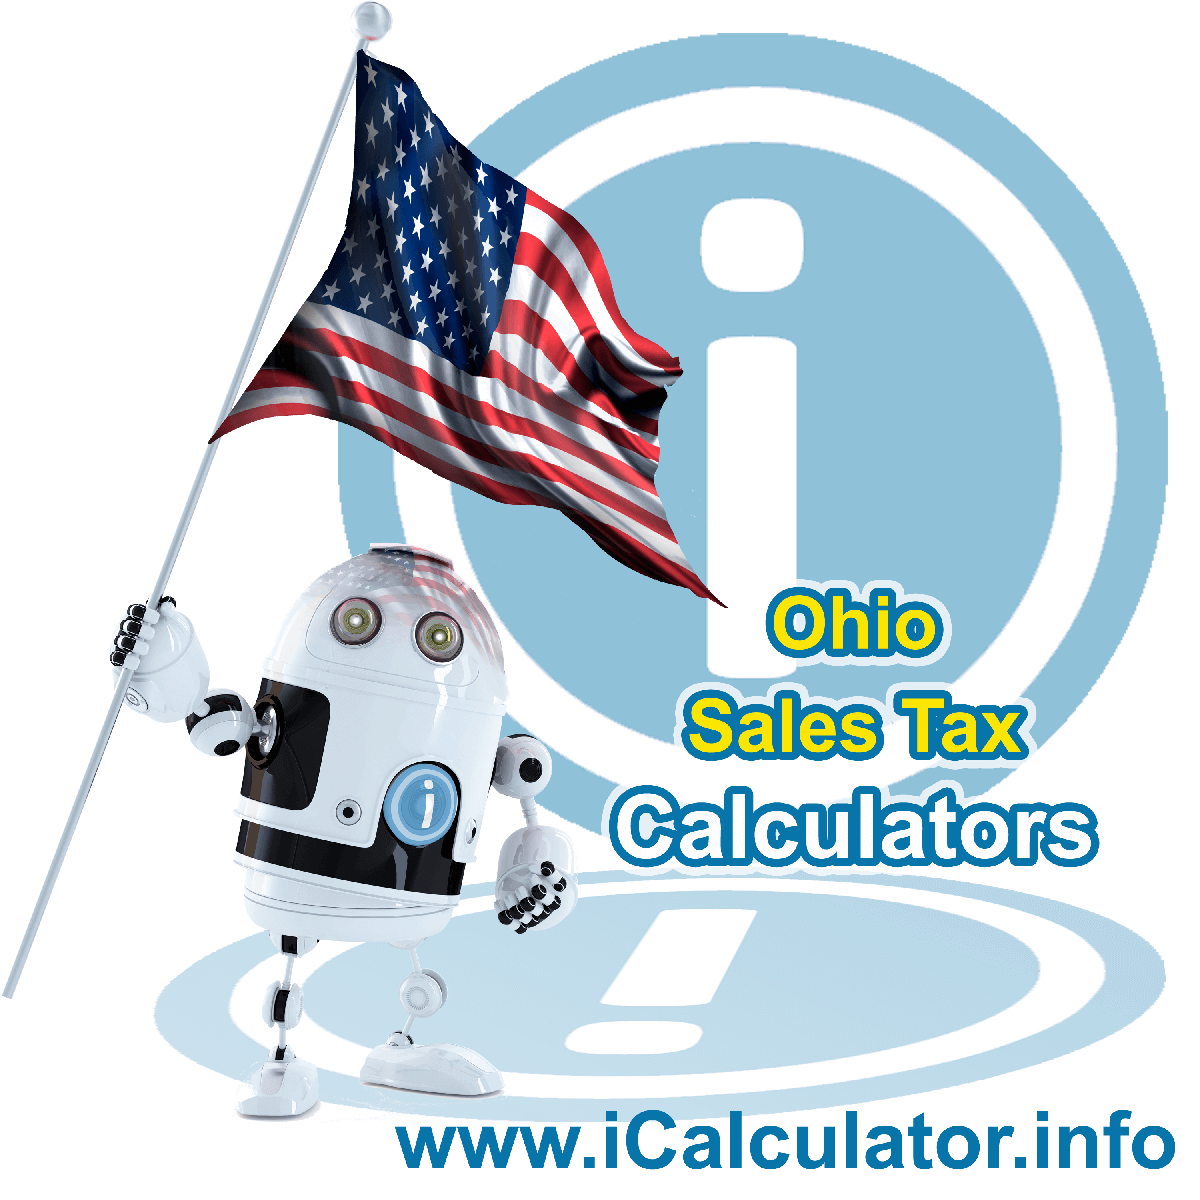 Ohio Sales Tax Comparison Calculator: This image illustrates a calculator robot comparing sales tax in Ohio manually using the Ohio Sales Tax Formula. You can use this information to compare Sales Tax manually or use the Ohio Sales Tax Comparison Calculator to calculate and compare Ohio sales tax online.